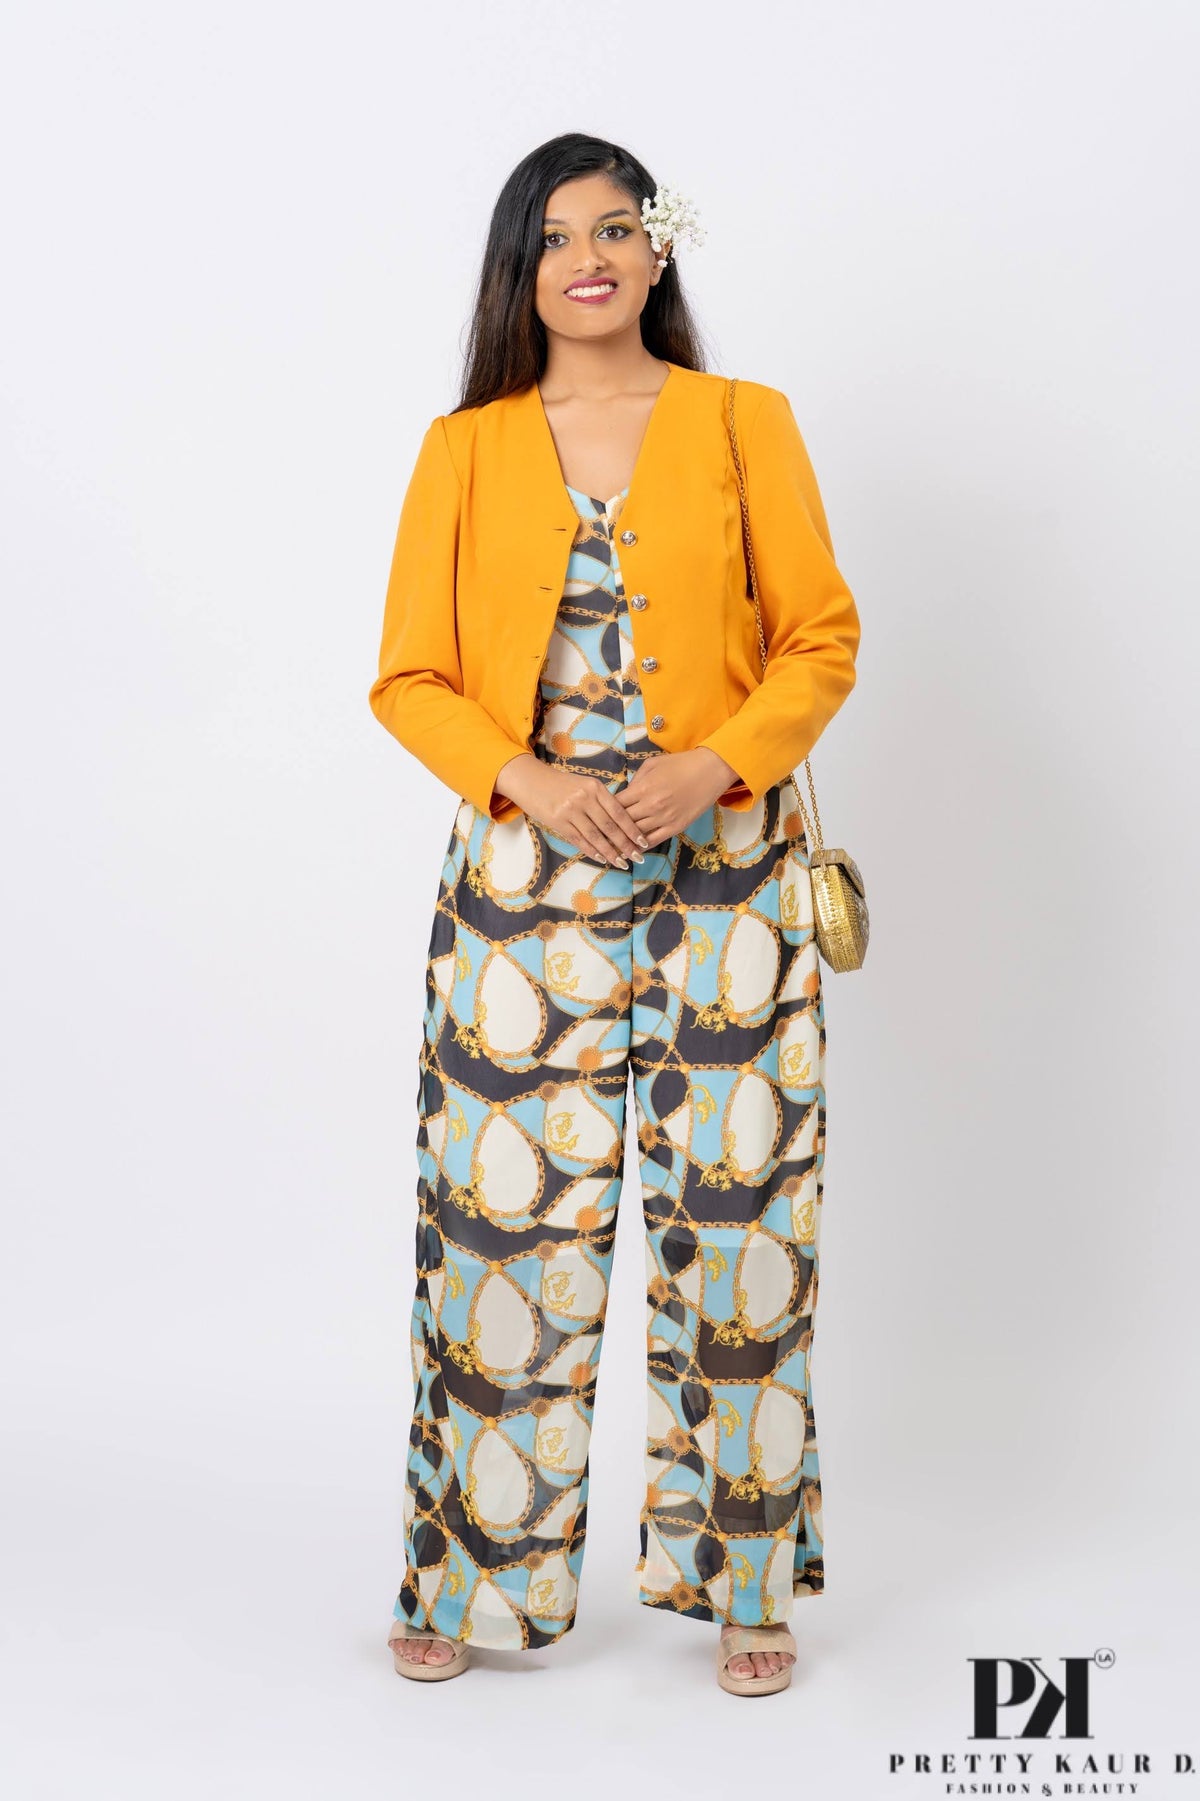 Pretty-Kaur-fashion-beauty-Printed-Jumpsuit-with-Jacket-1